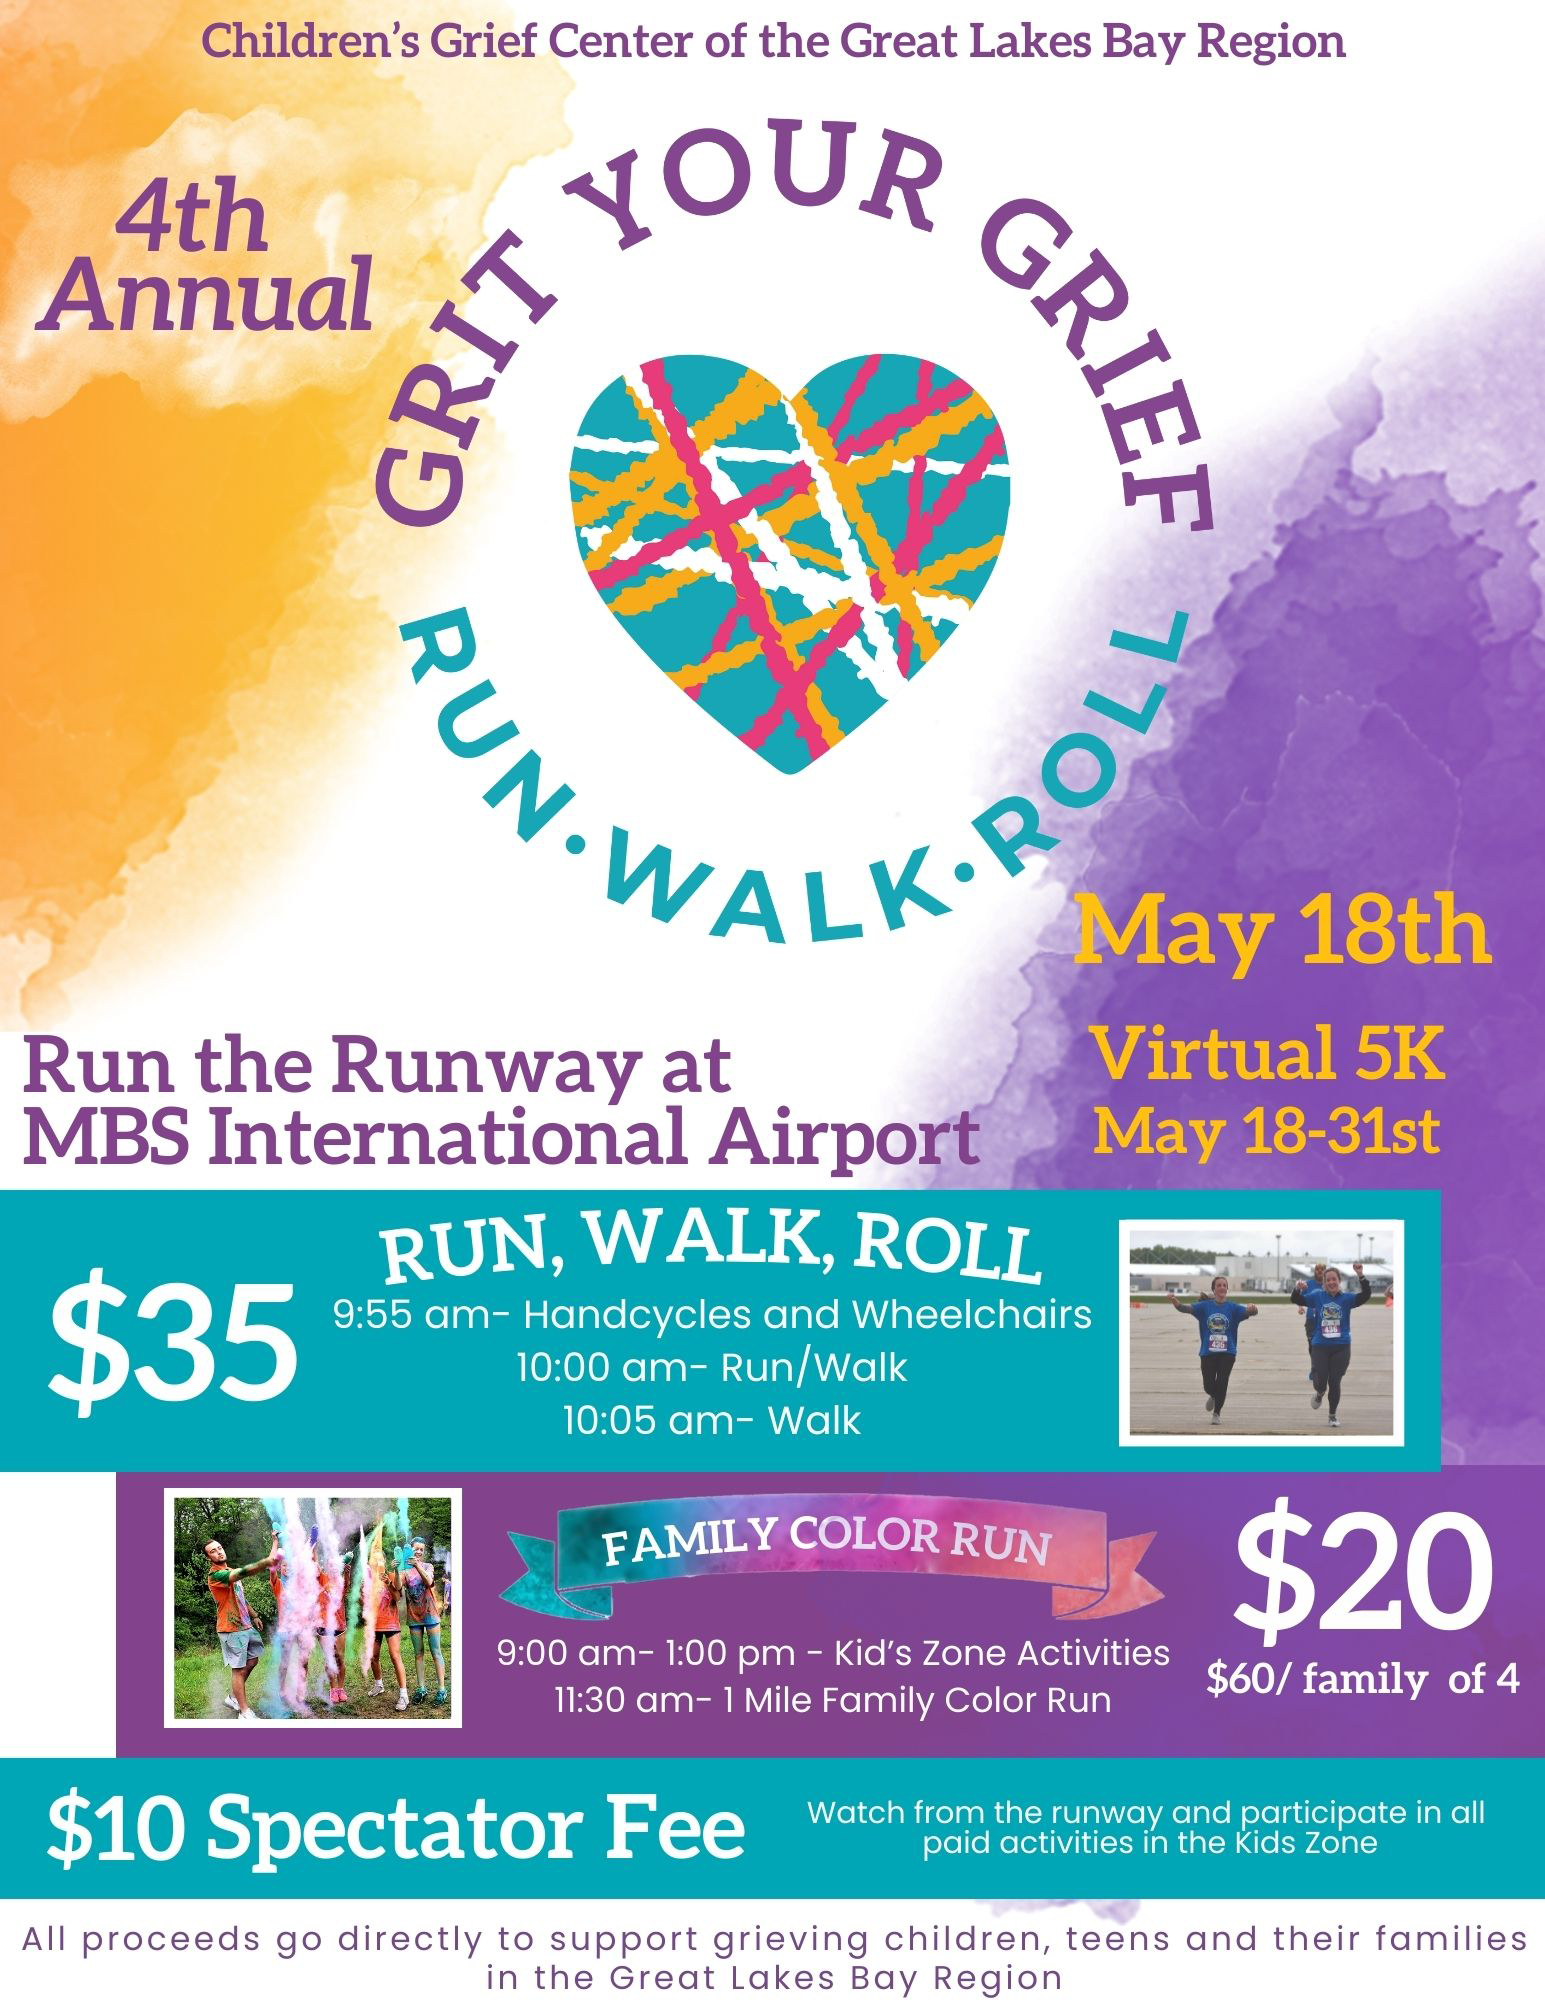 “Grit Your Grief” Run/Walk/Roll at MBS International Airport